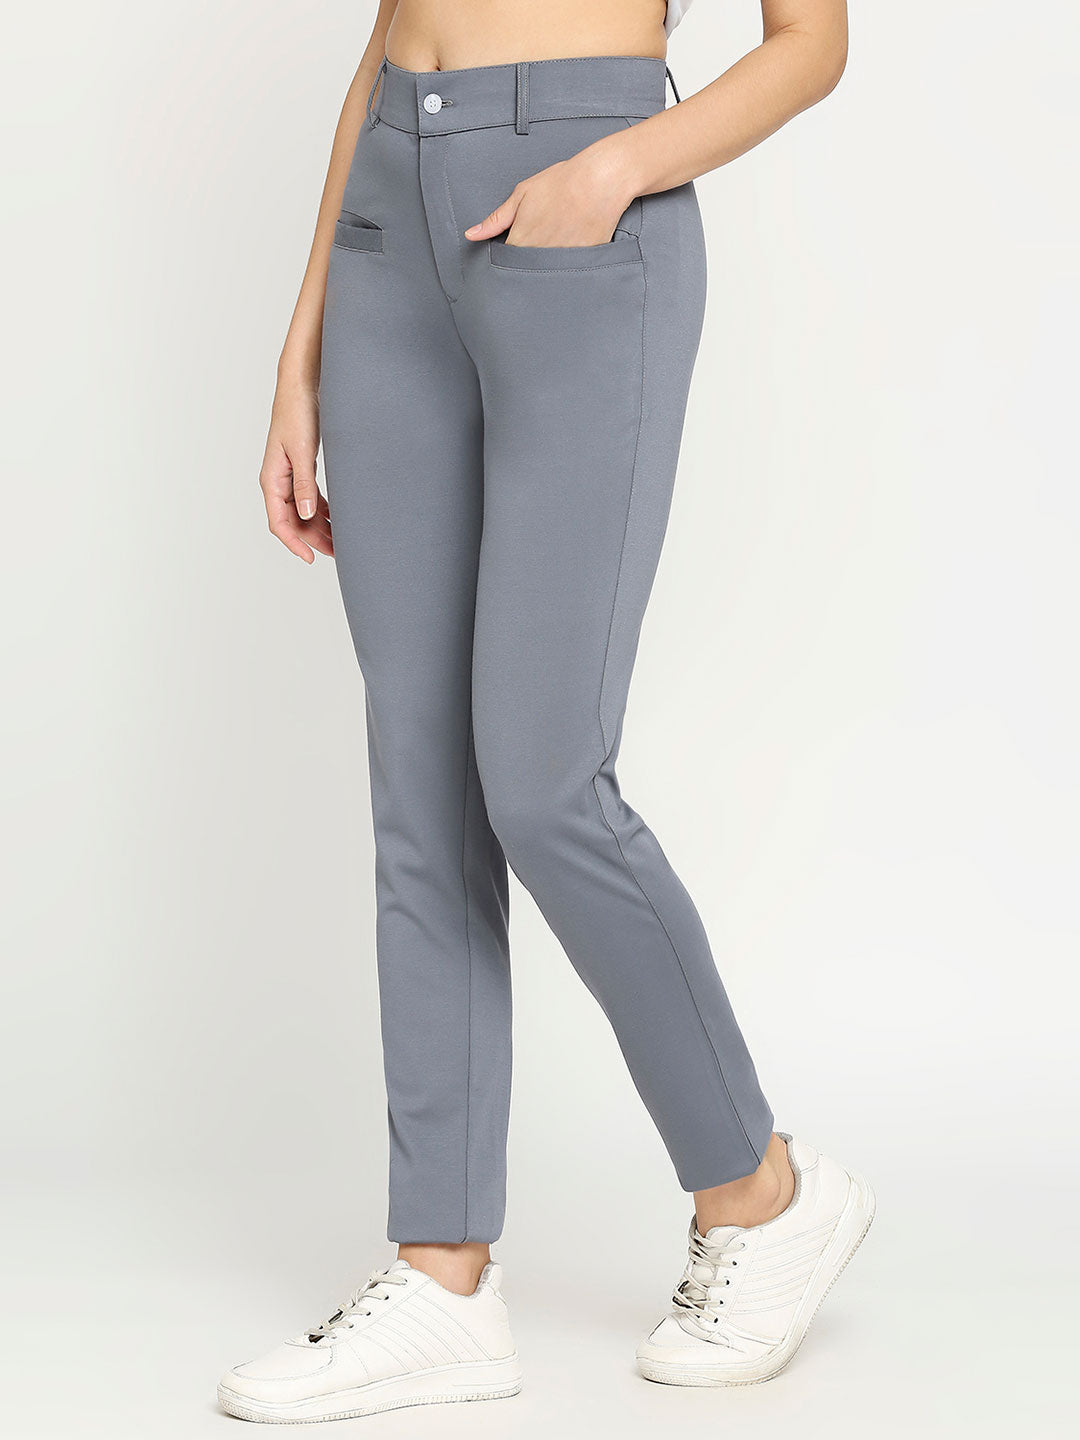 Women's Grey Golf Pants with Welt Pockets - Stylish and